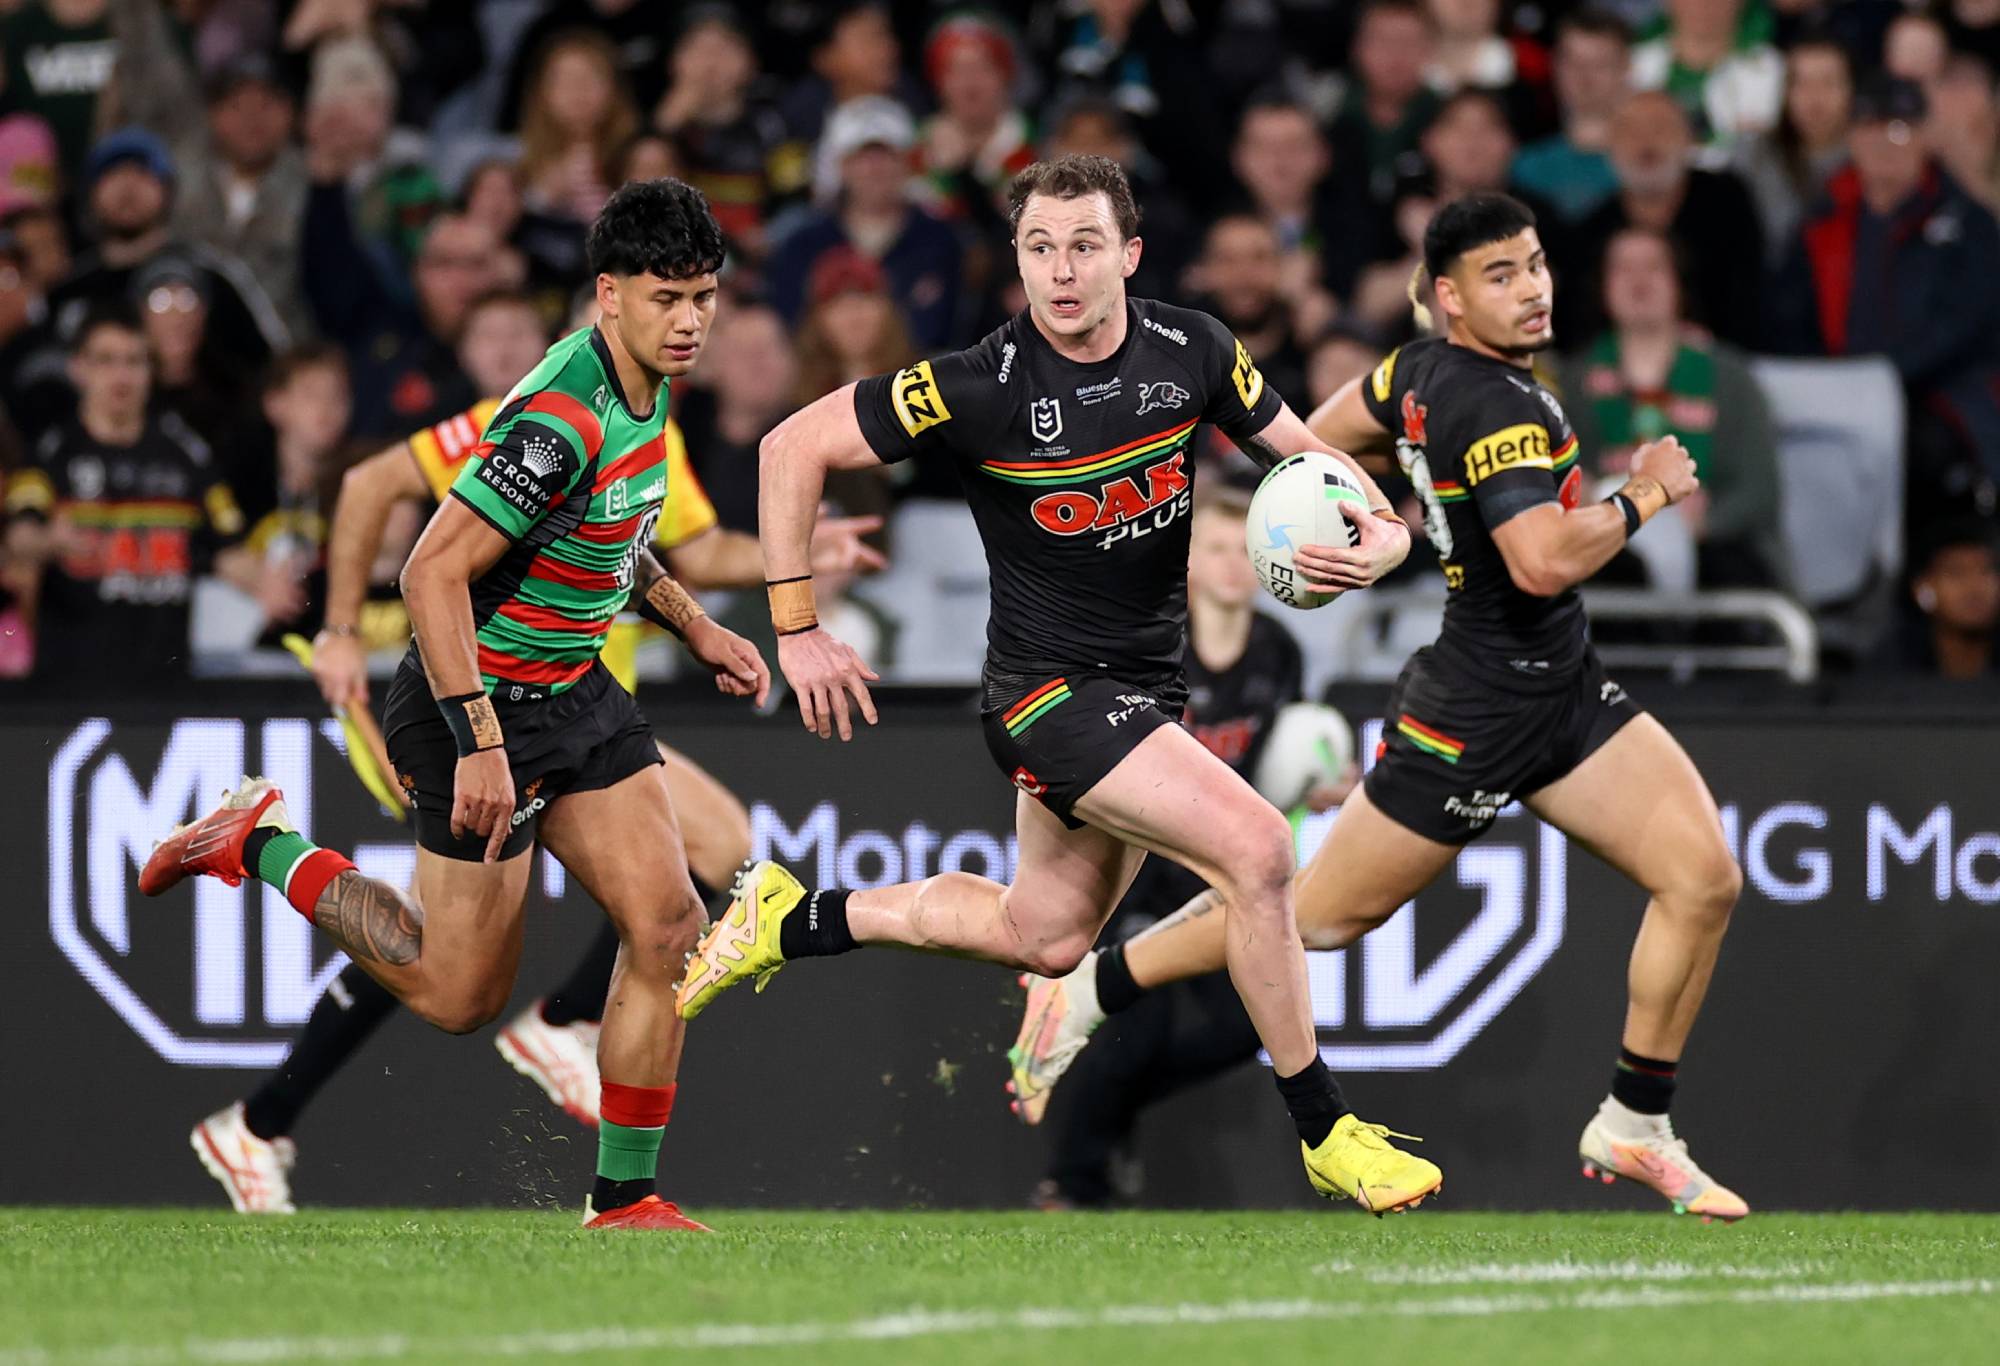 SYDNEY, AUSTRALIA - AUGUST 18: Dylan Edwards of the Panthers makes a break to score a tryduring the round 23 NRL match between the South Sydney Rabbitohs and the Penrith Panthers at Accor Stadium, on August 18, 2022, in Sydney, Australia. (Photo by Cameron Spencer/Getty Images)